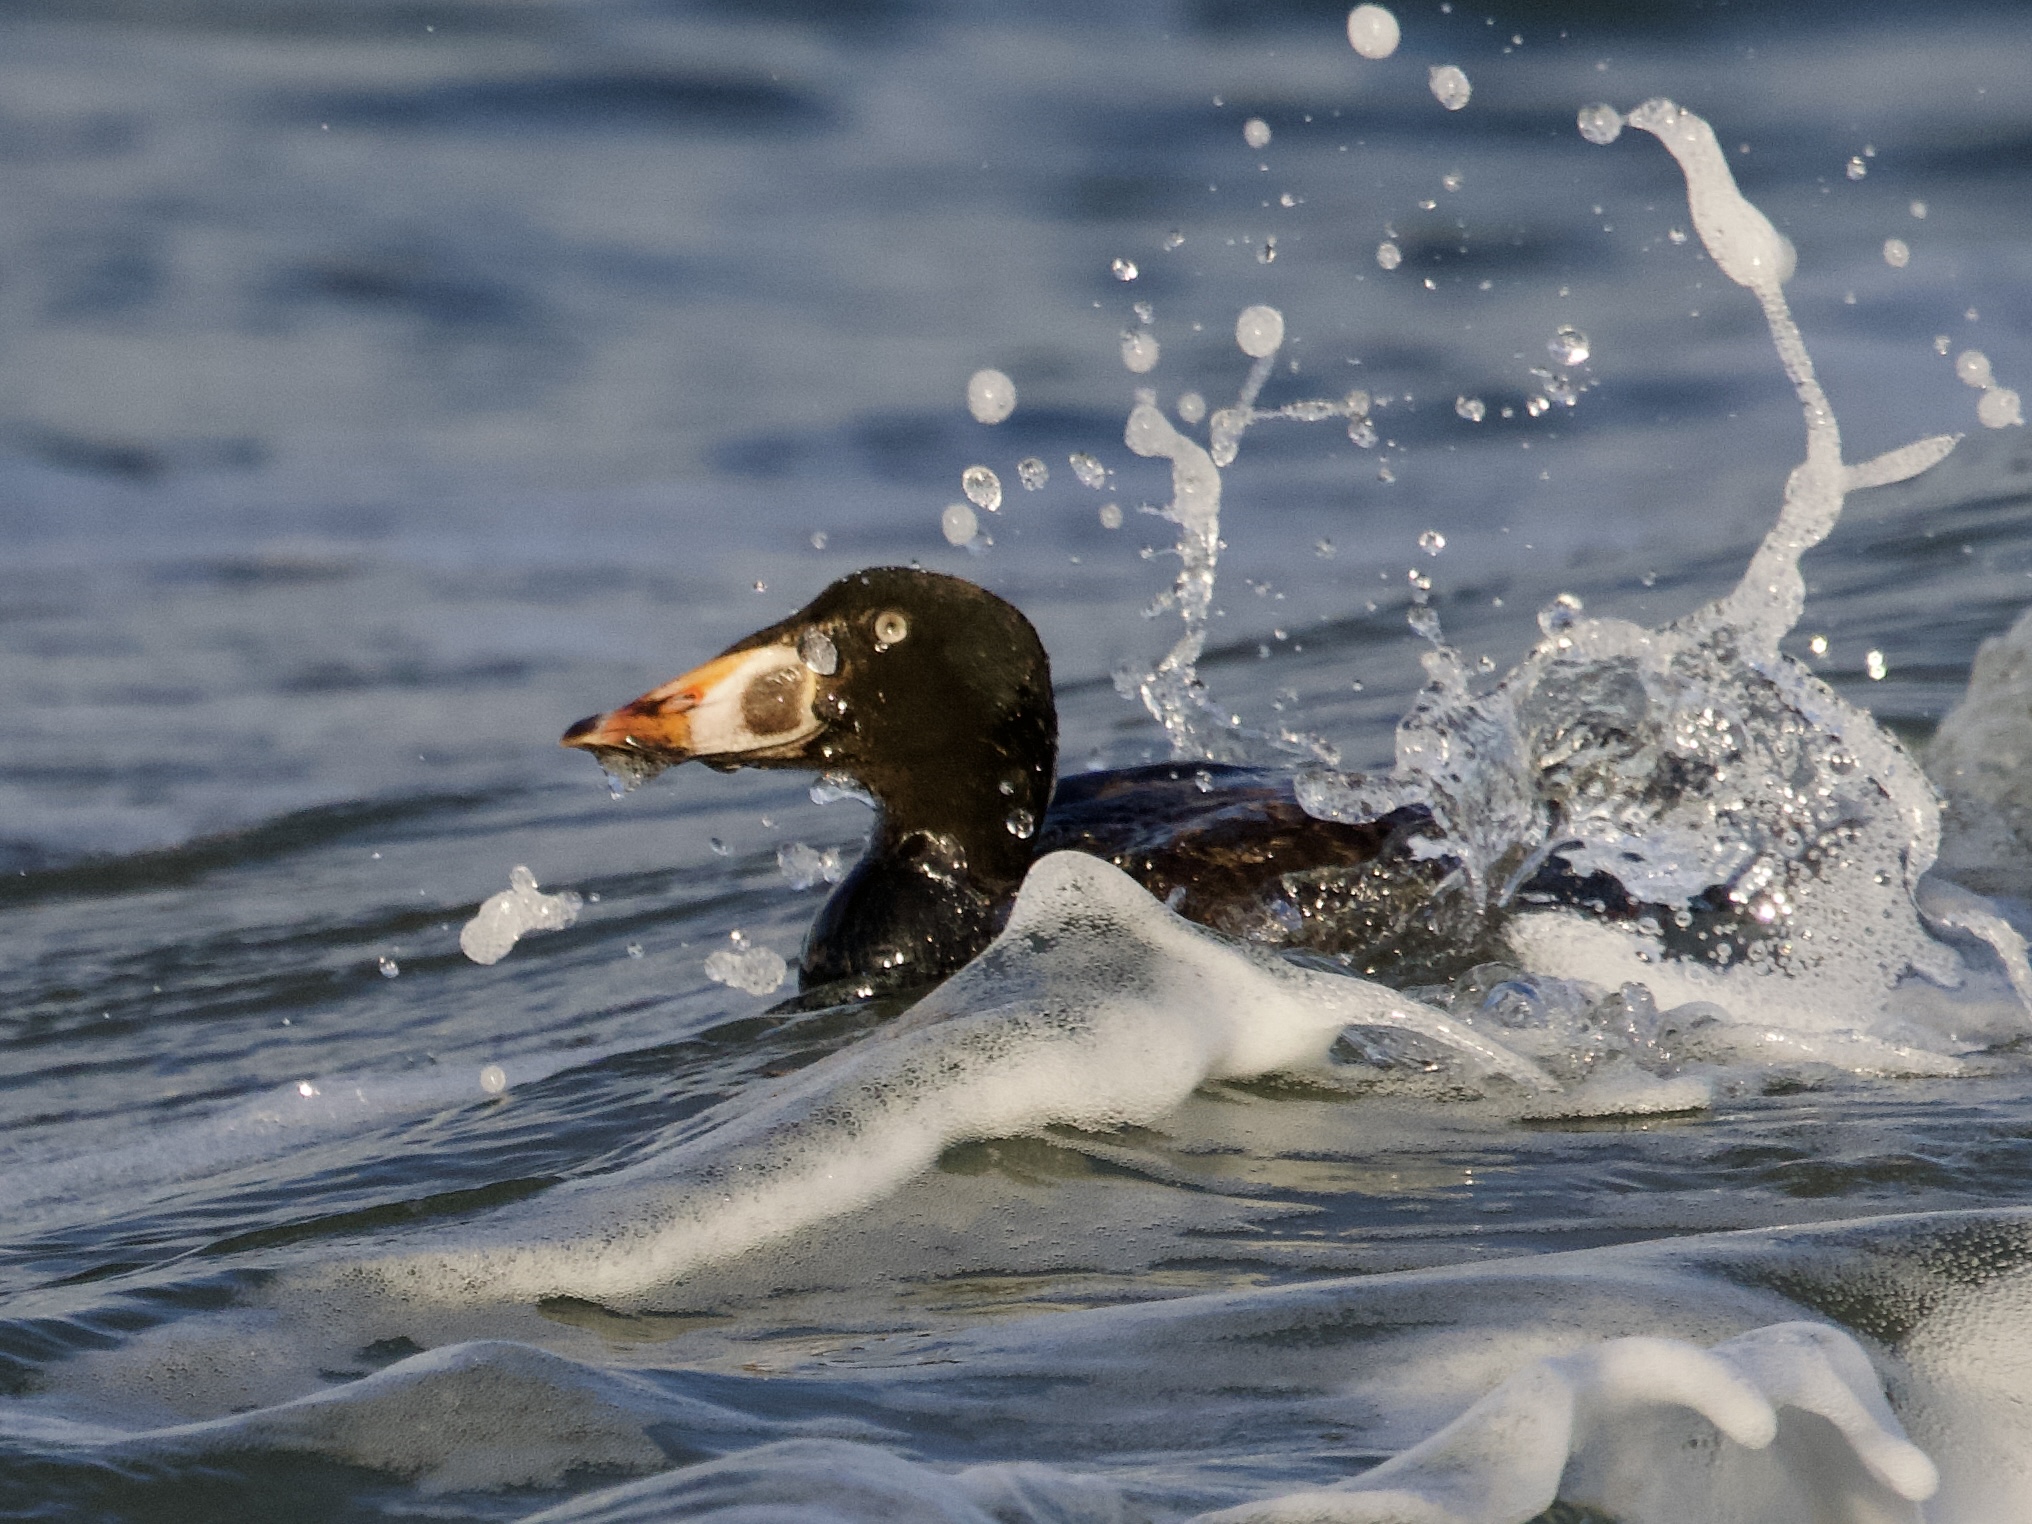 Surf Scoter in the Surf on San Francisco Bay